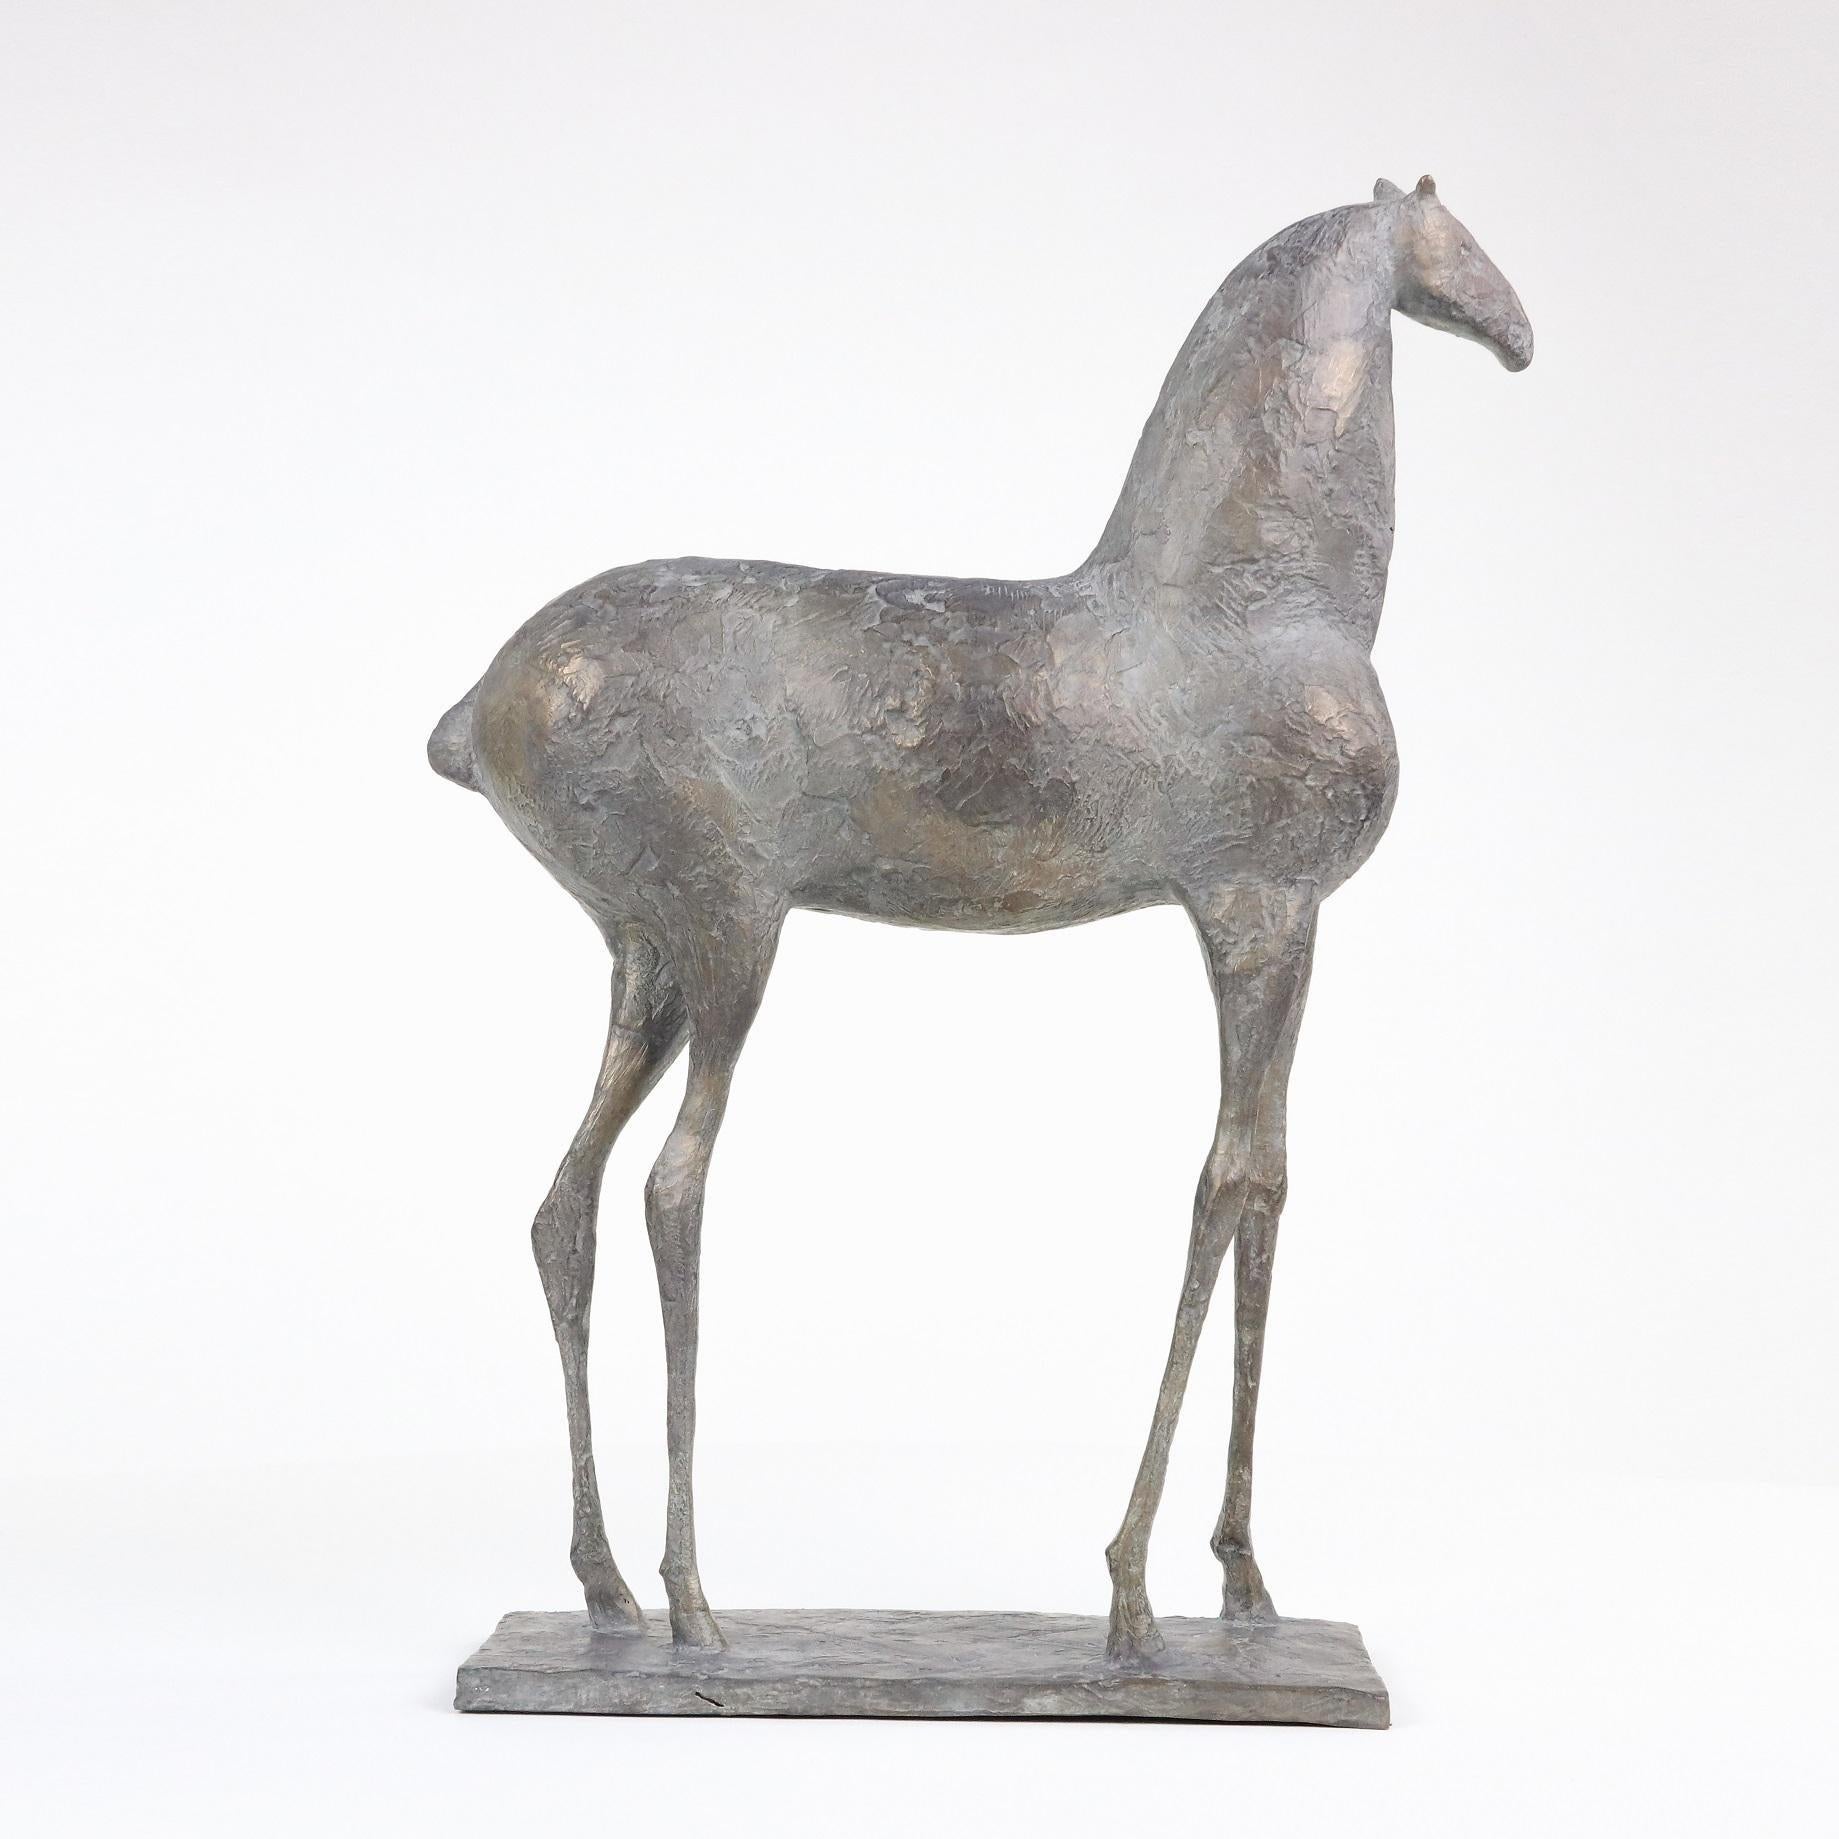 Small Horse II is a bronze sculpture by French contemporary artist Pierre Yermia, dimensions are 43 × 33 × 11 cm (16.9 × 13 × 4.3 in). 
The sculpture is signed and numbered, it is part of a limited edition of 8 editions + 4 artist’s proofs, and